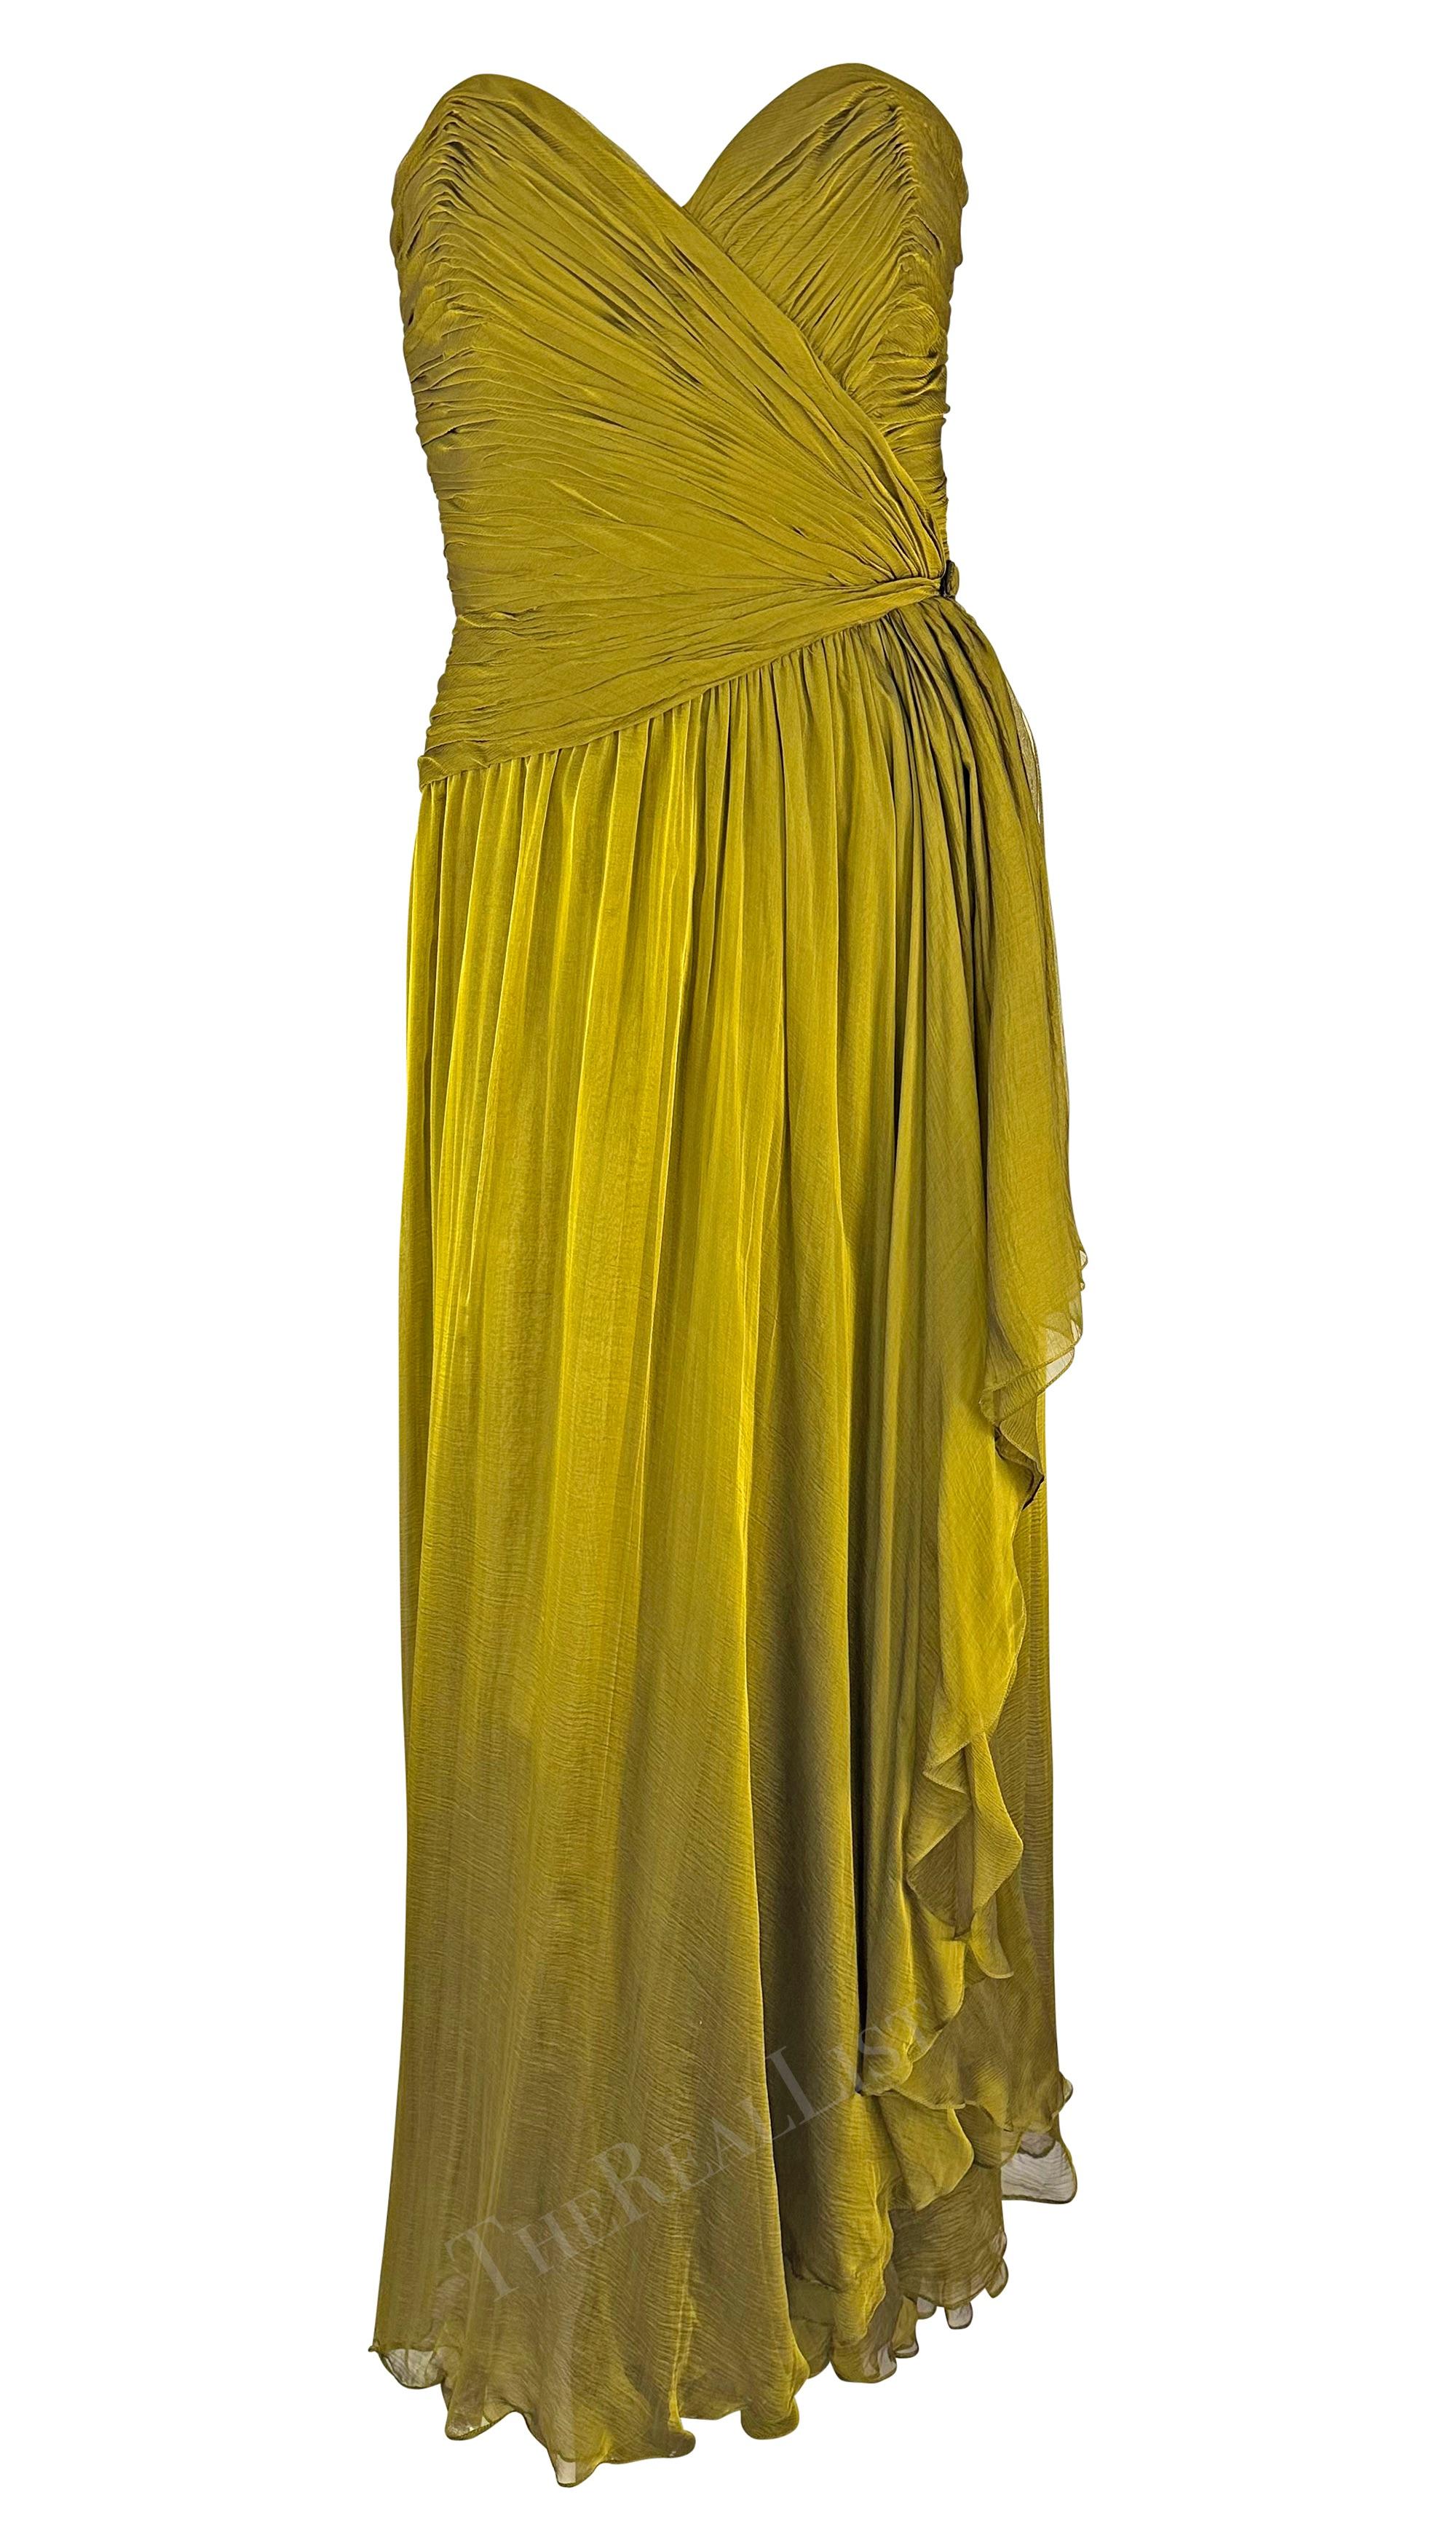 F/W 1989 Oscar de la Renta Runway Chartreuse Chiffon Strapless Gown  In Excellent Condition For Sale In West Hollywood, CA